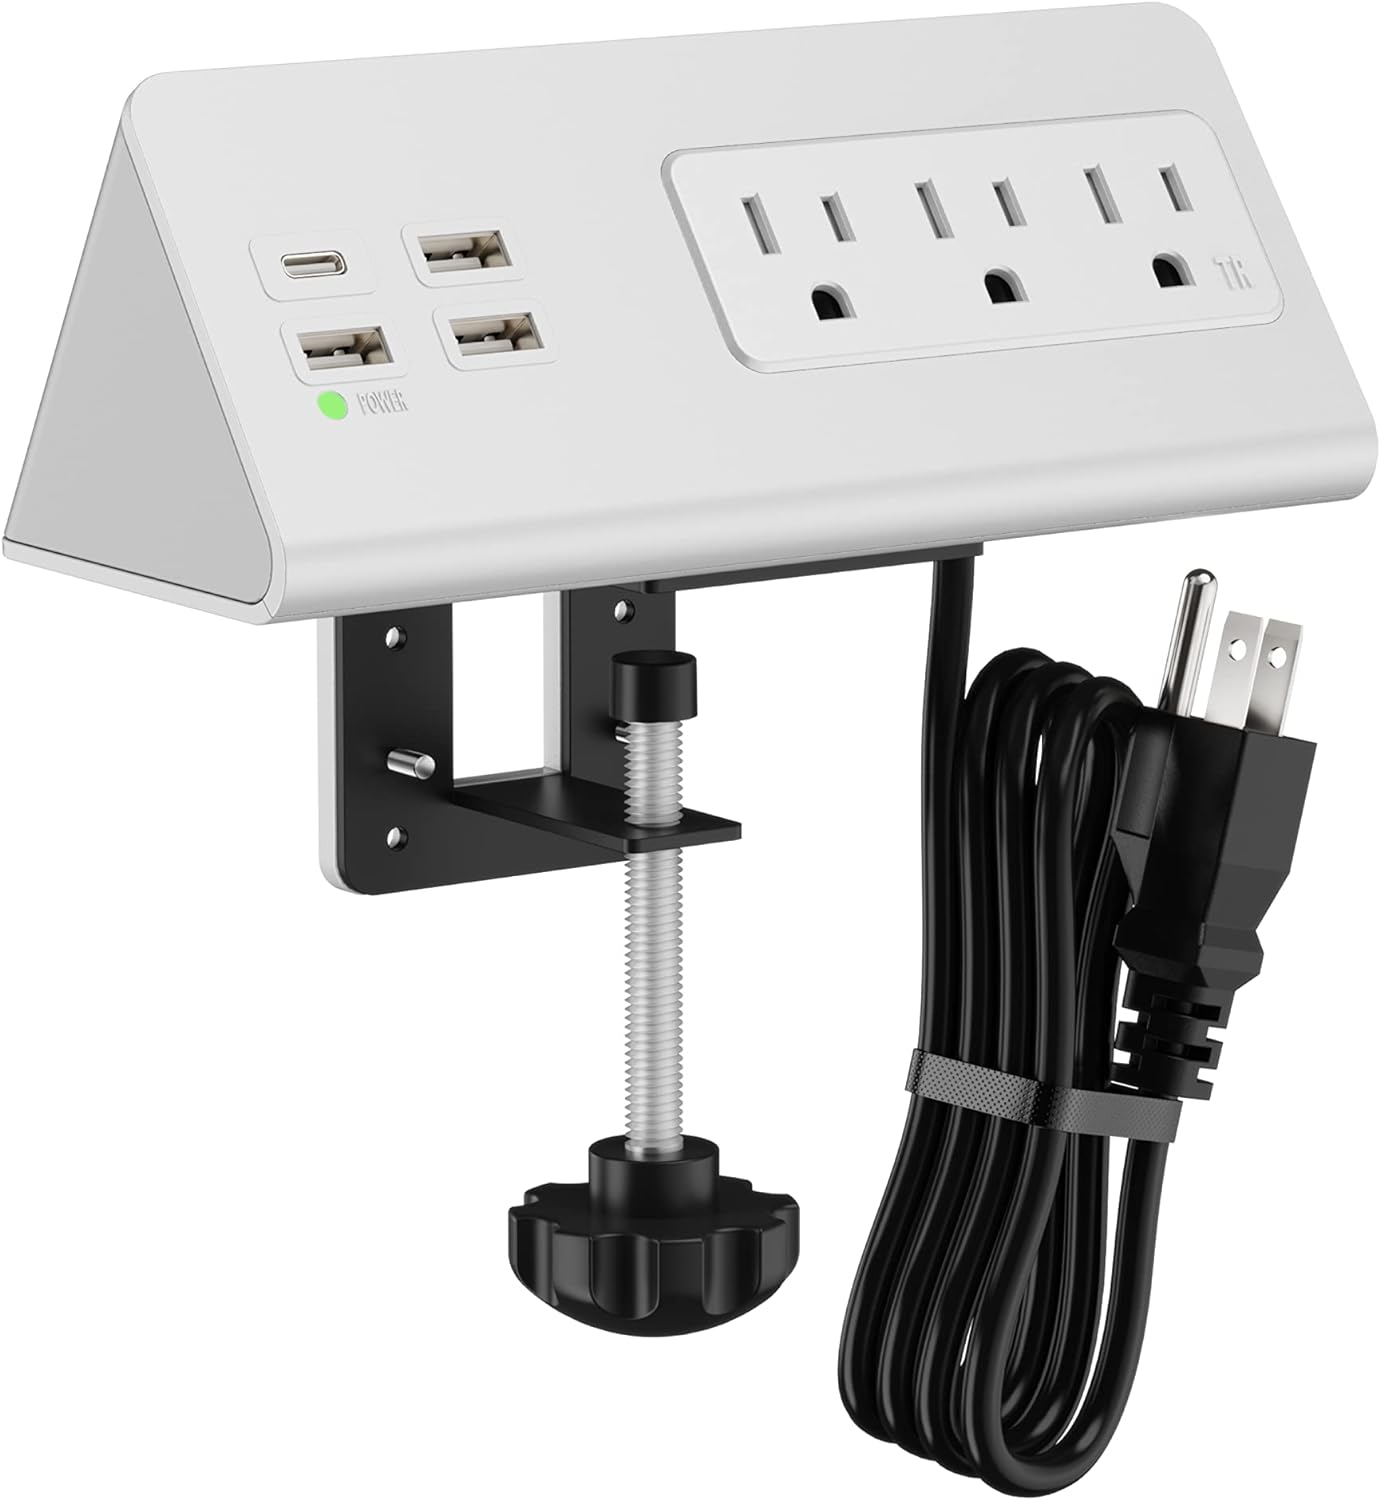 Desk Edge Clamp Mount Power Strips with 4 USB Ports(1xPD 20W USB-C Port)& 3 AC Outlets,1875 Joules Tabletop Surge Protector, Power Sockets for Office Table/Hotel Nightstands,ETL Listed (1-Pack, White)